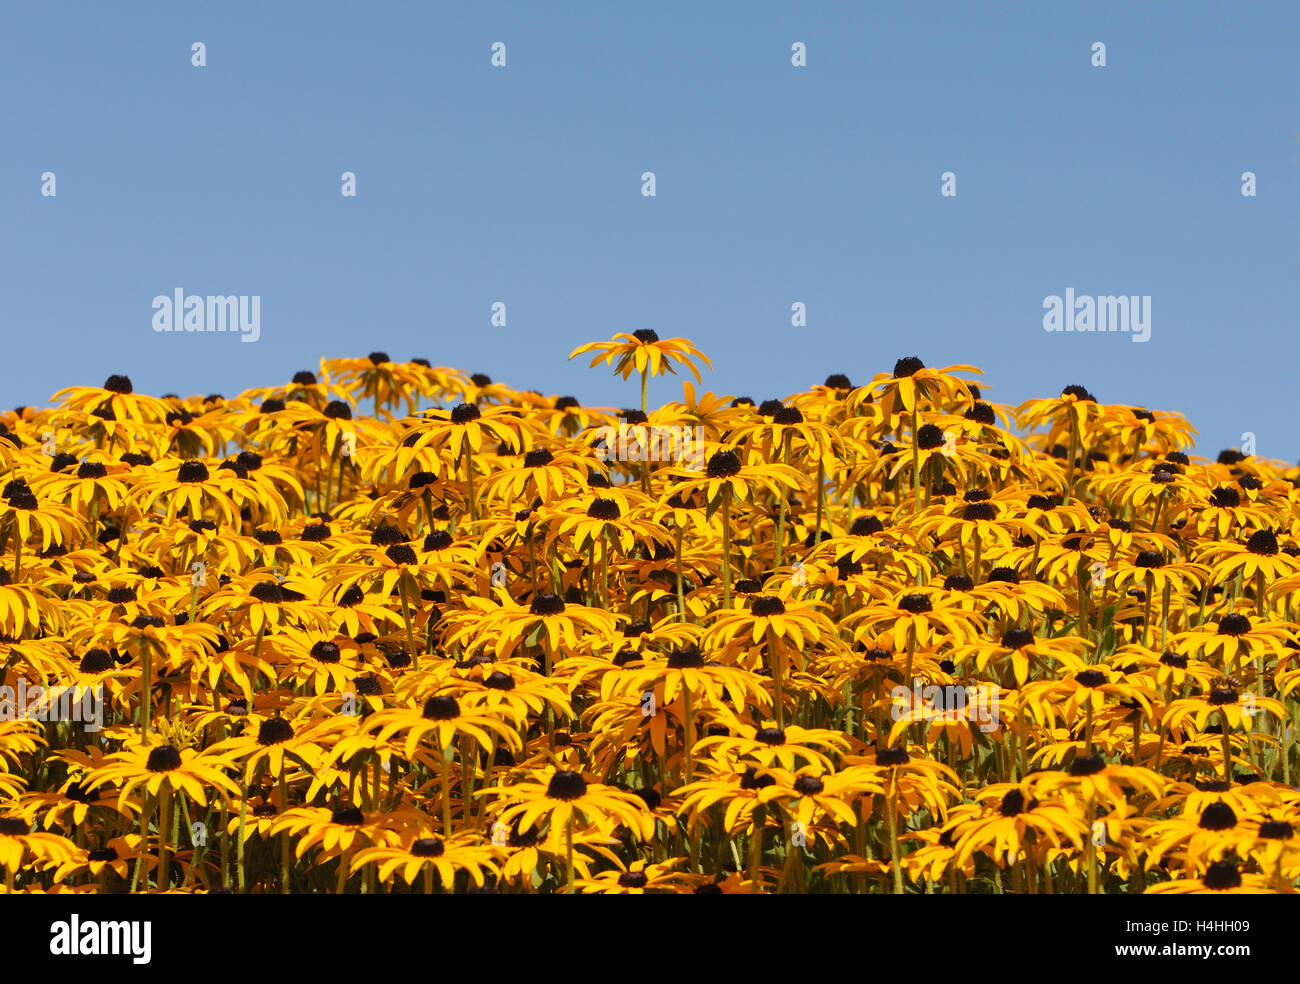 Tall yellow and black Rudbeckia flowers against a blue sky. Henfield, Sussex, UK. Stock Photo